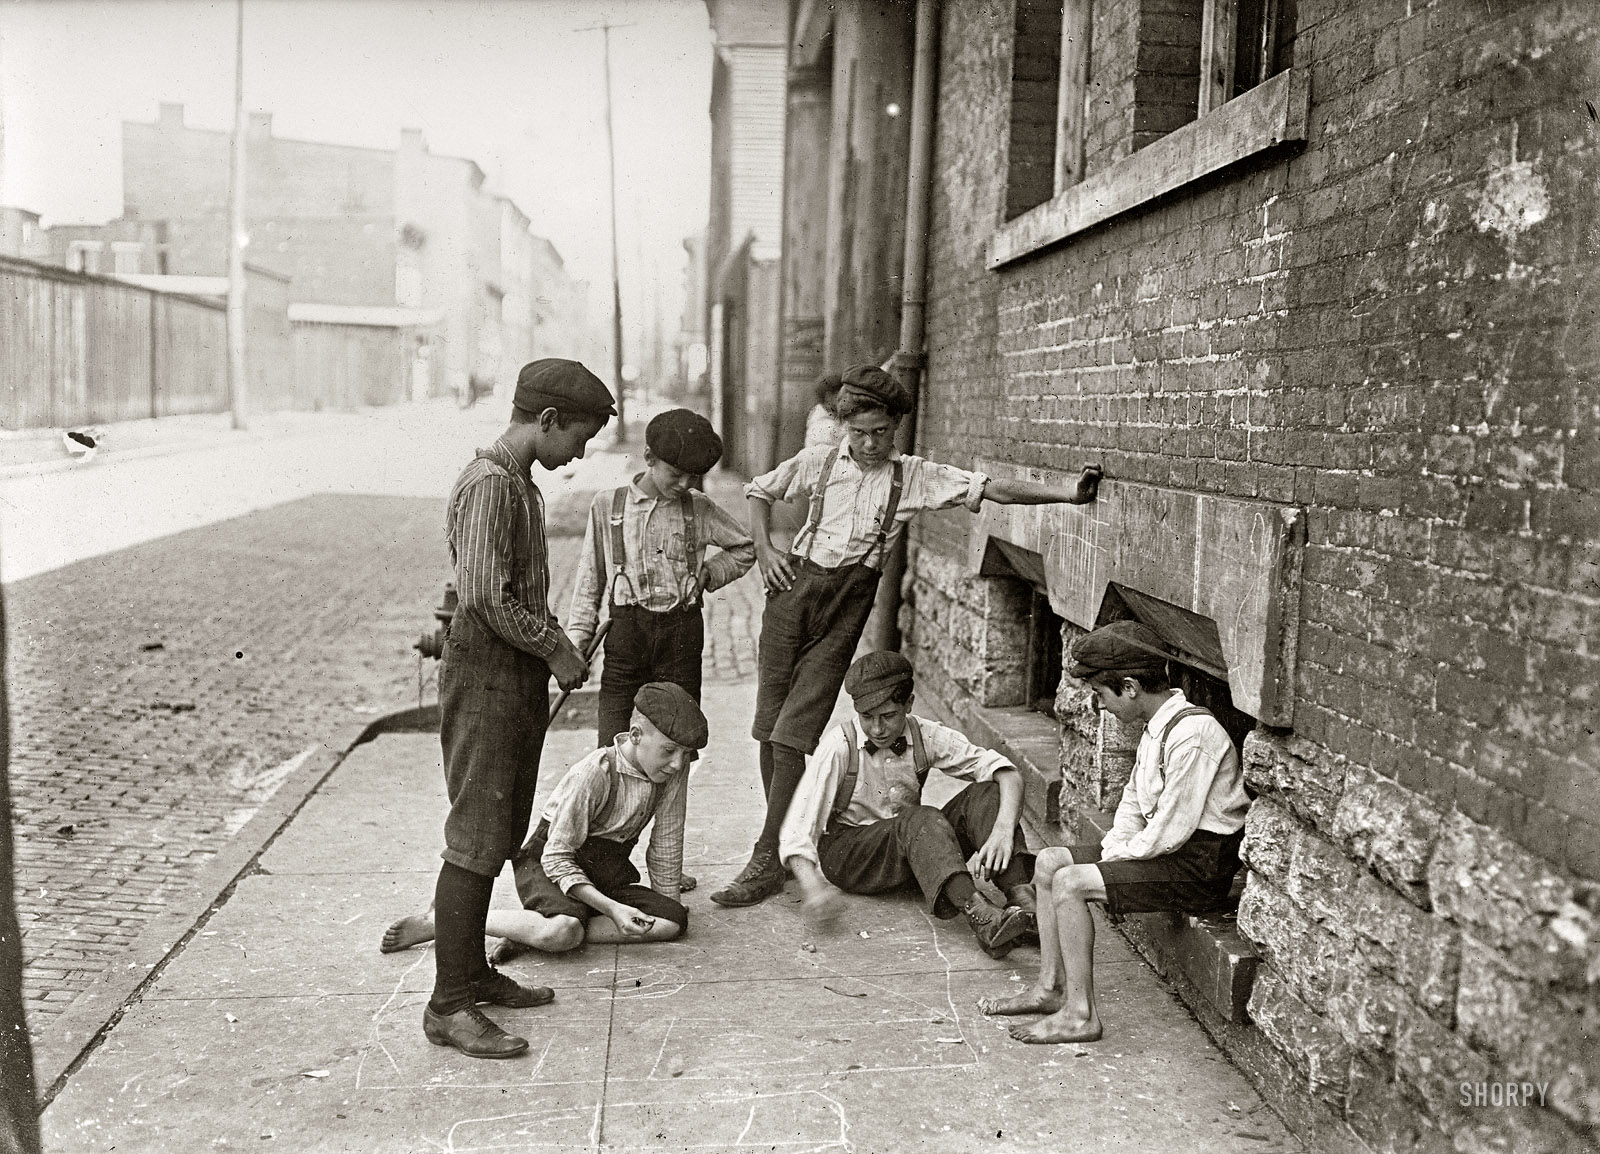 "Game of craps. Cincinnati, Ohio. August 1908." Back in the good old days when kids made their own low-tech fun. Photo by Lewis Wickes Hine. View full size.